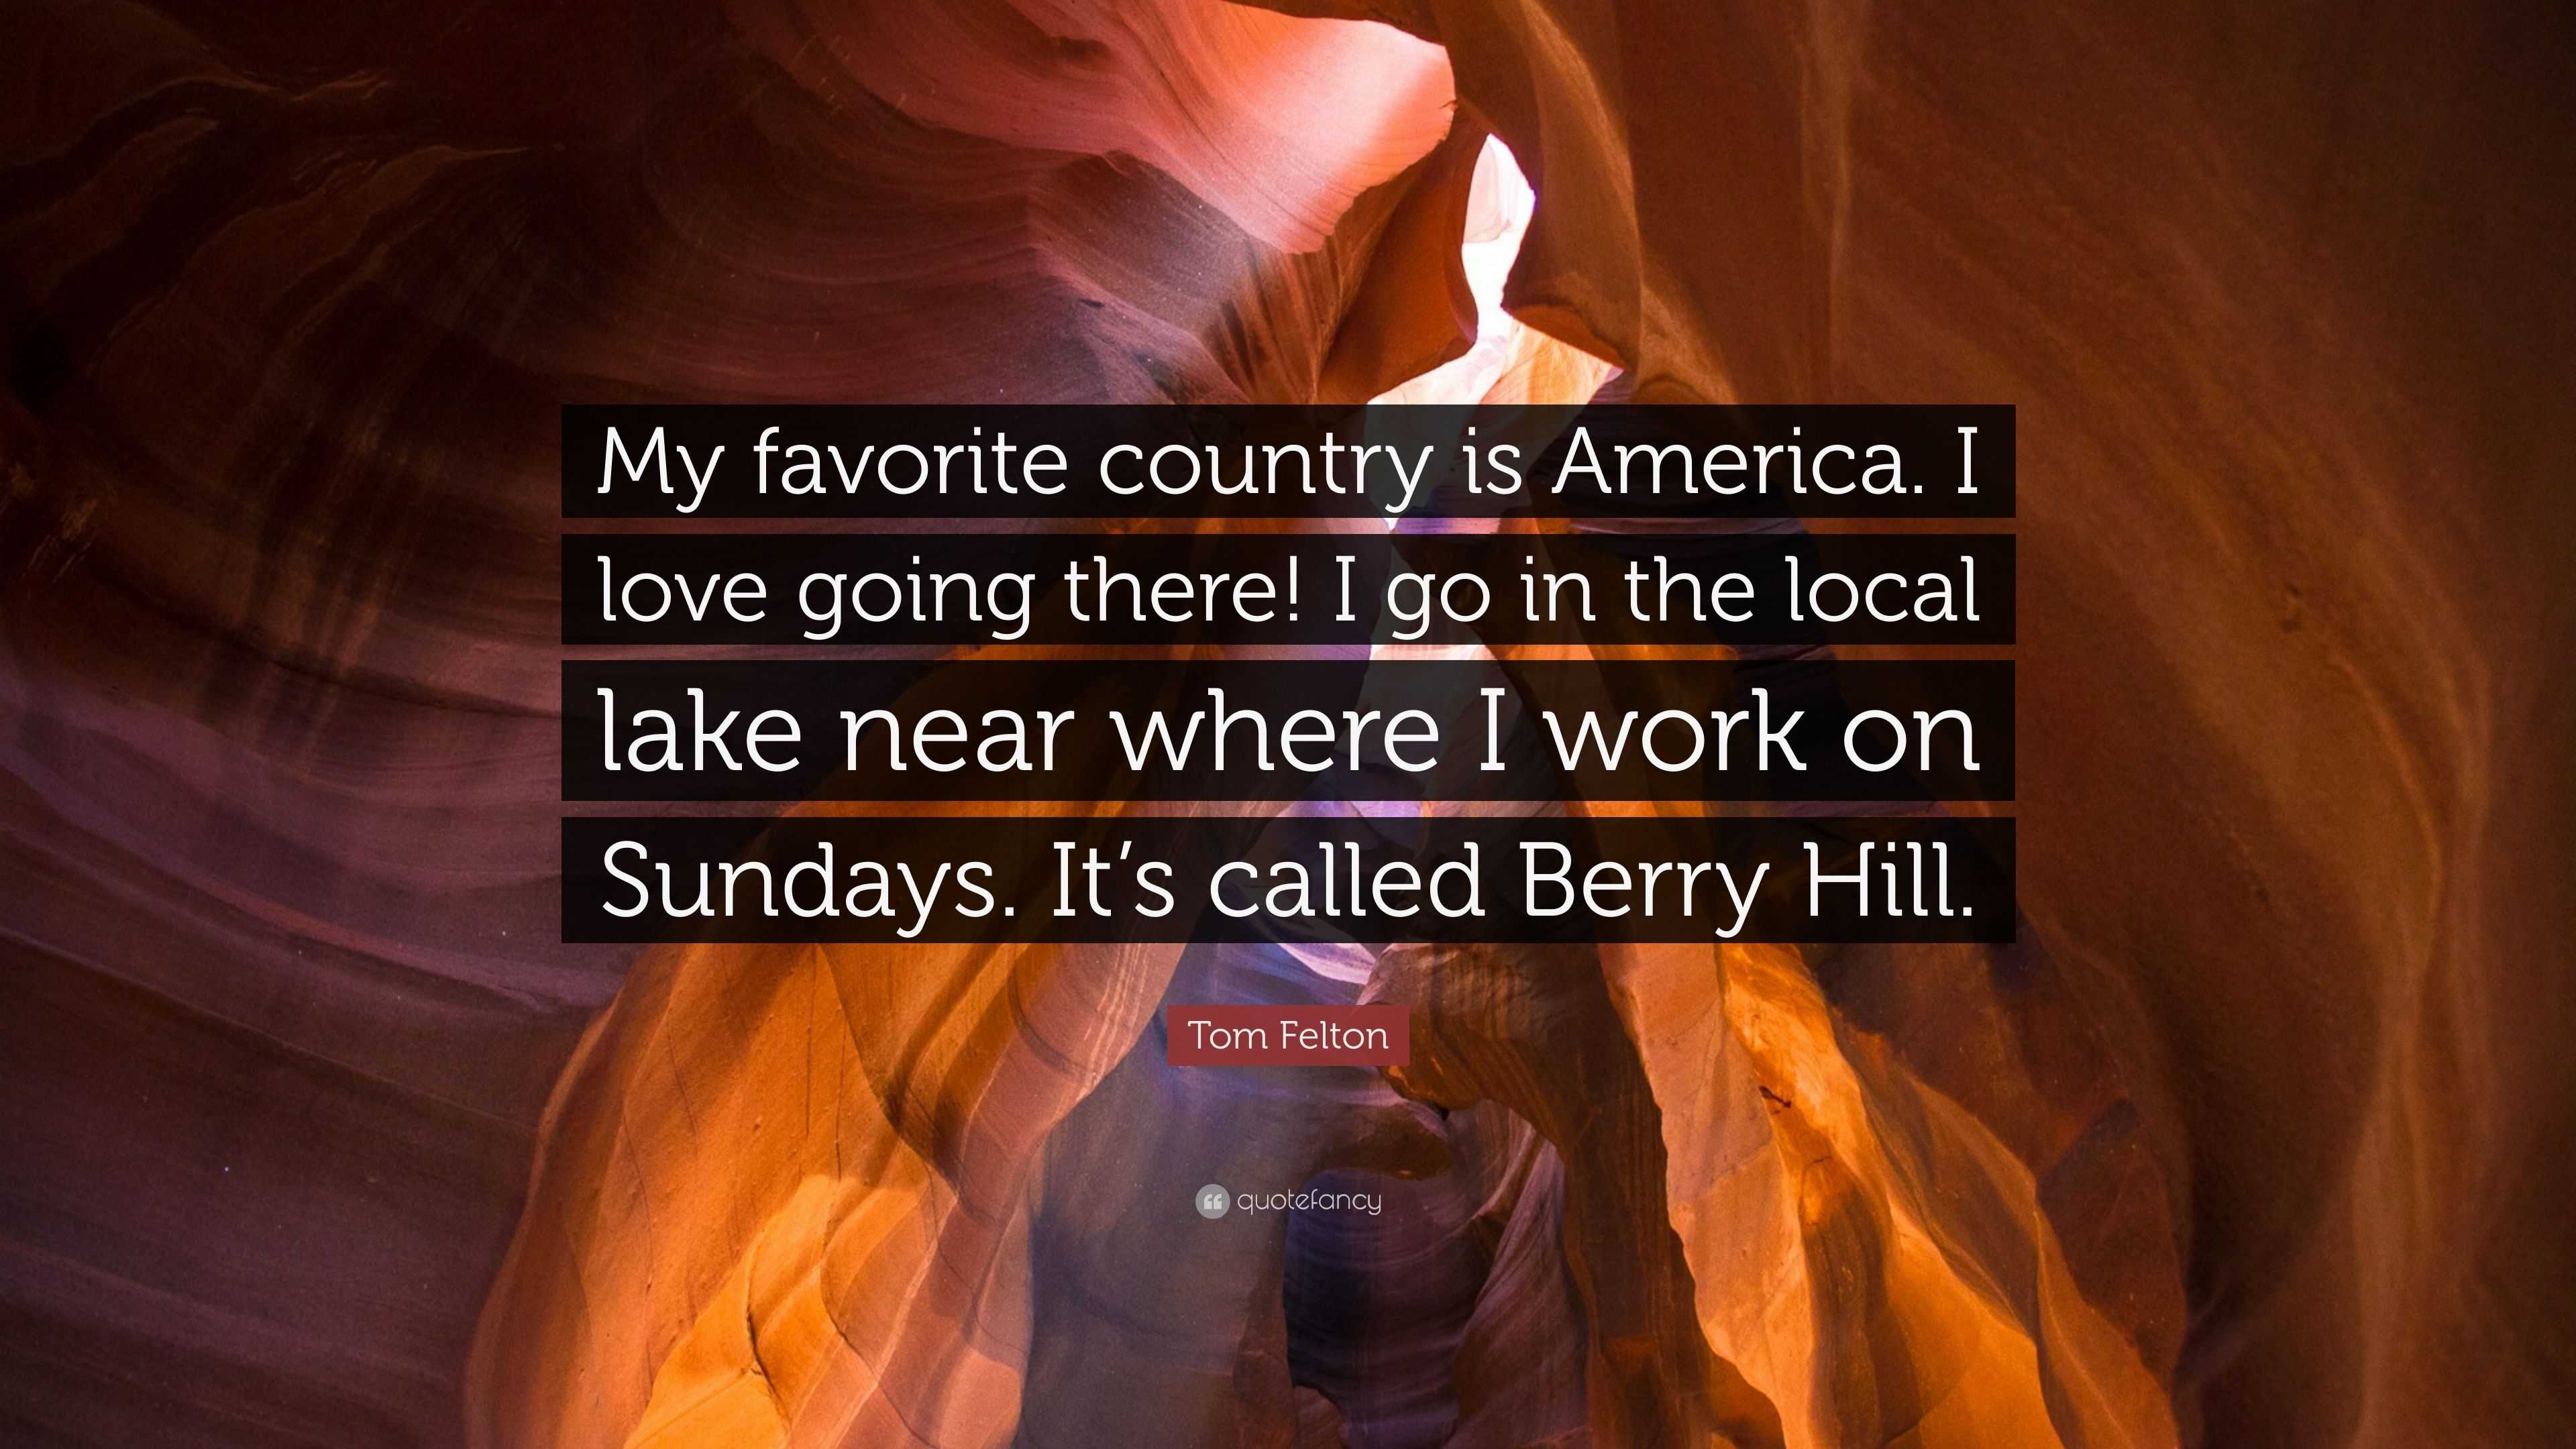 Tom Felton Quote: “My favorite country is America. I love going there! I go  in the local lake near where I work on Sundays. It's called Ber”